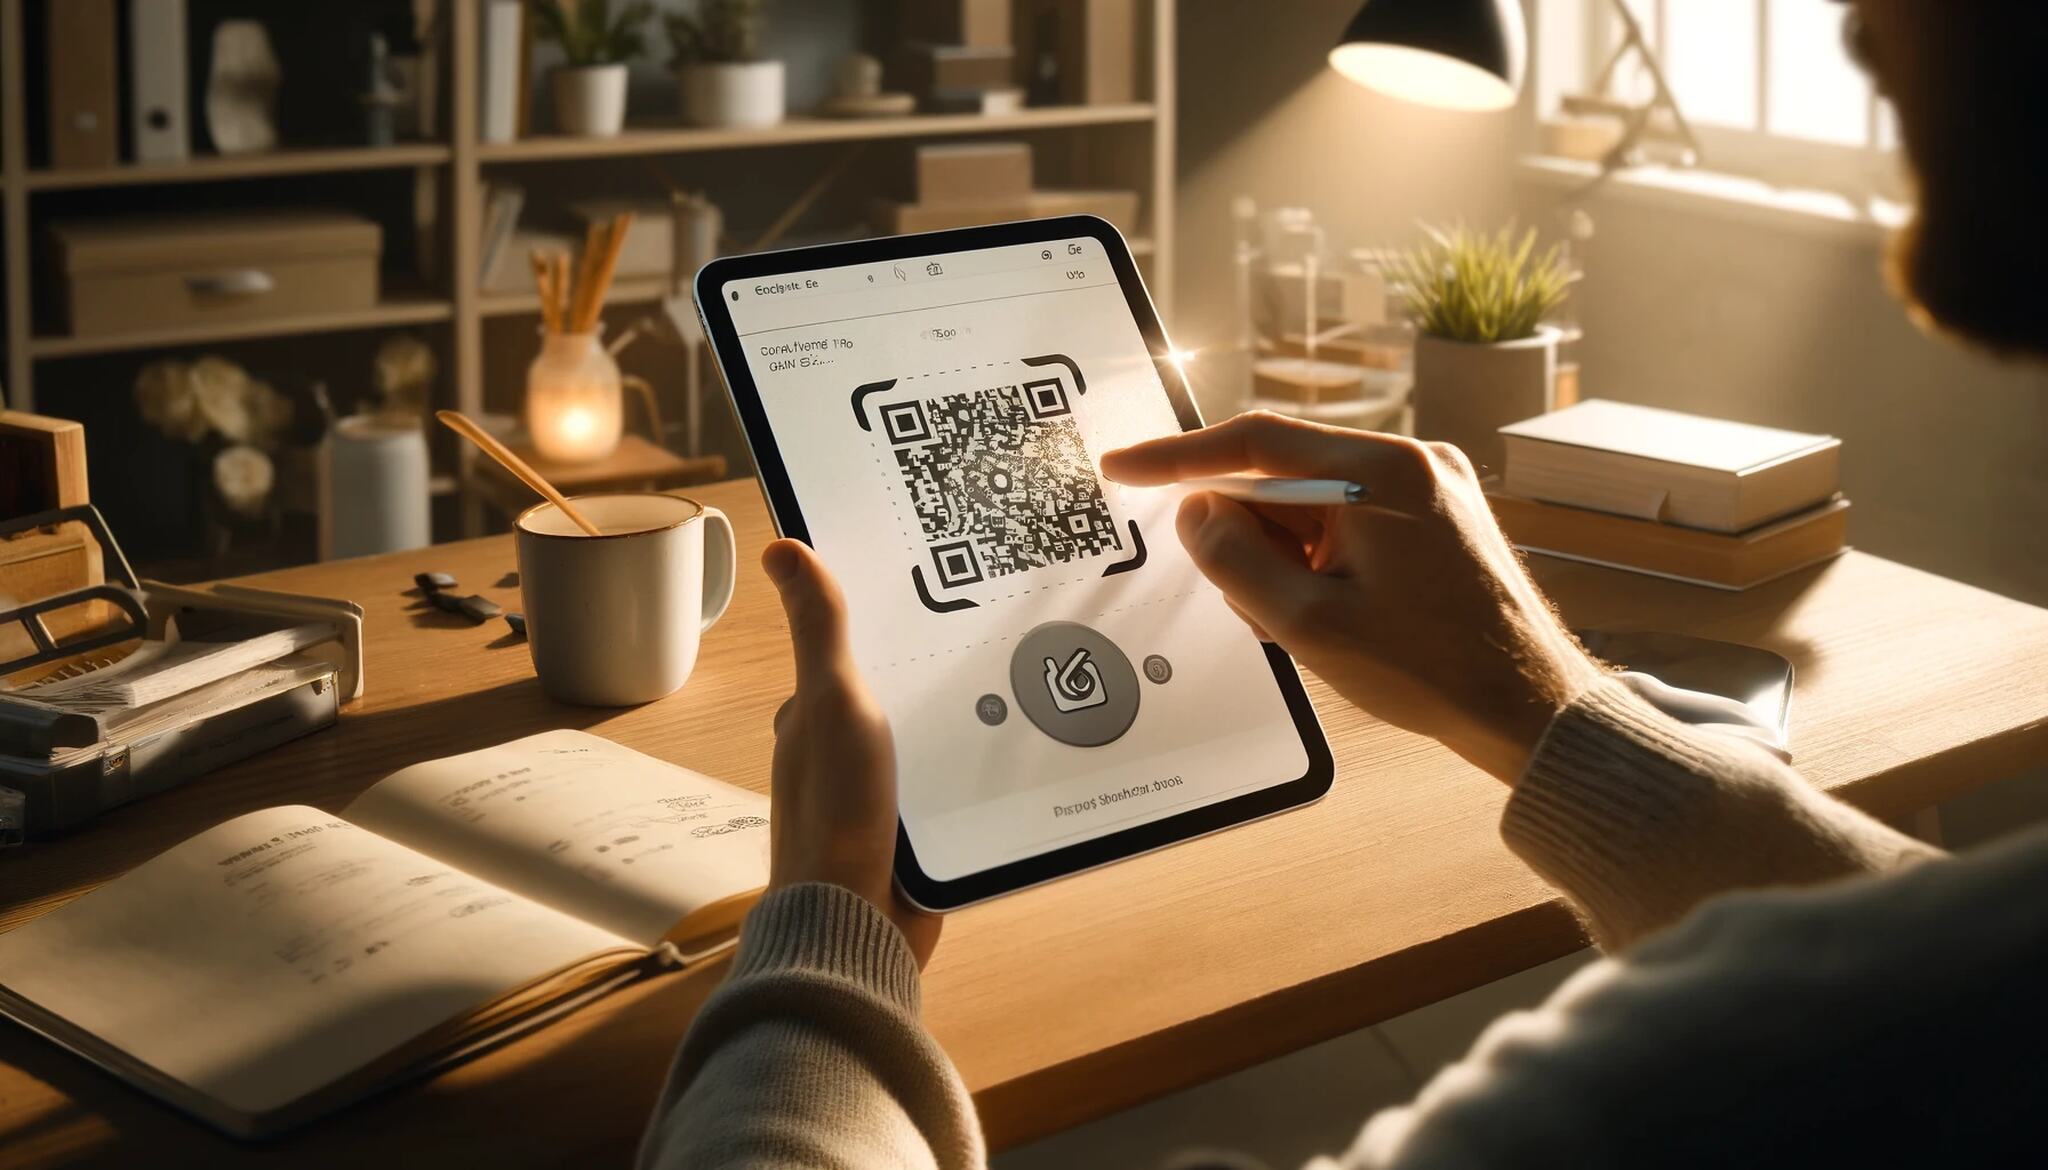 How to Scan a QR Code on iPad: A Quick Guide